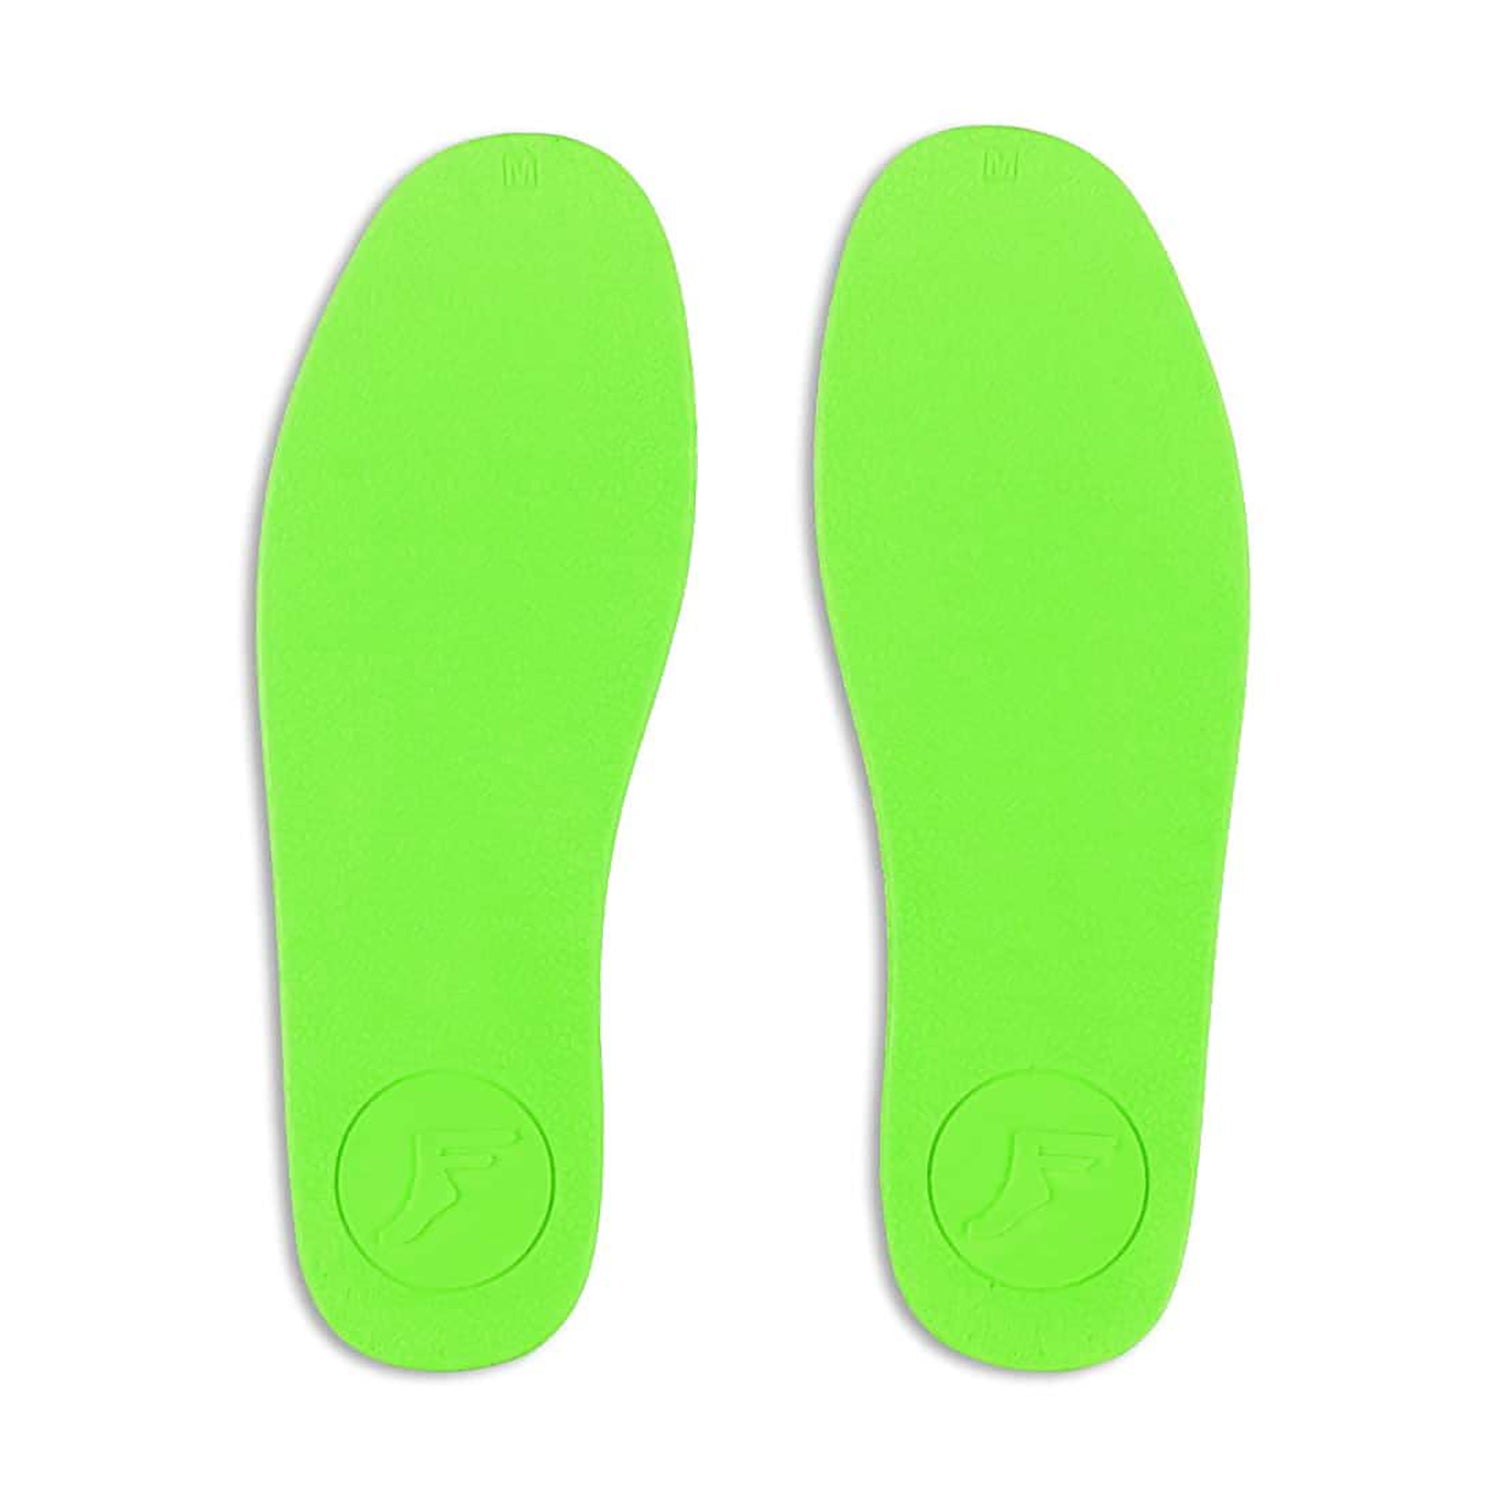 Green Camo 3mm insoles bottom view 